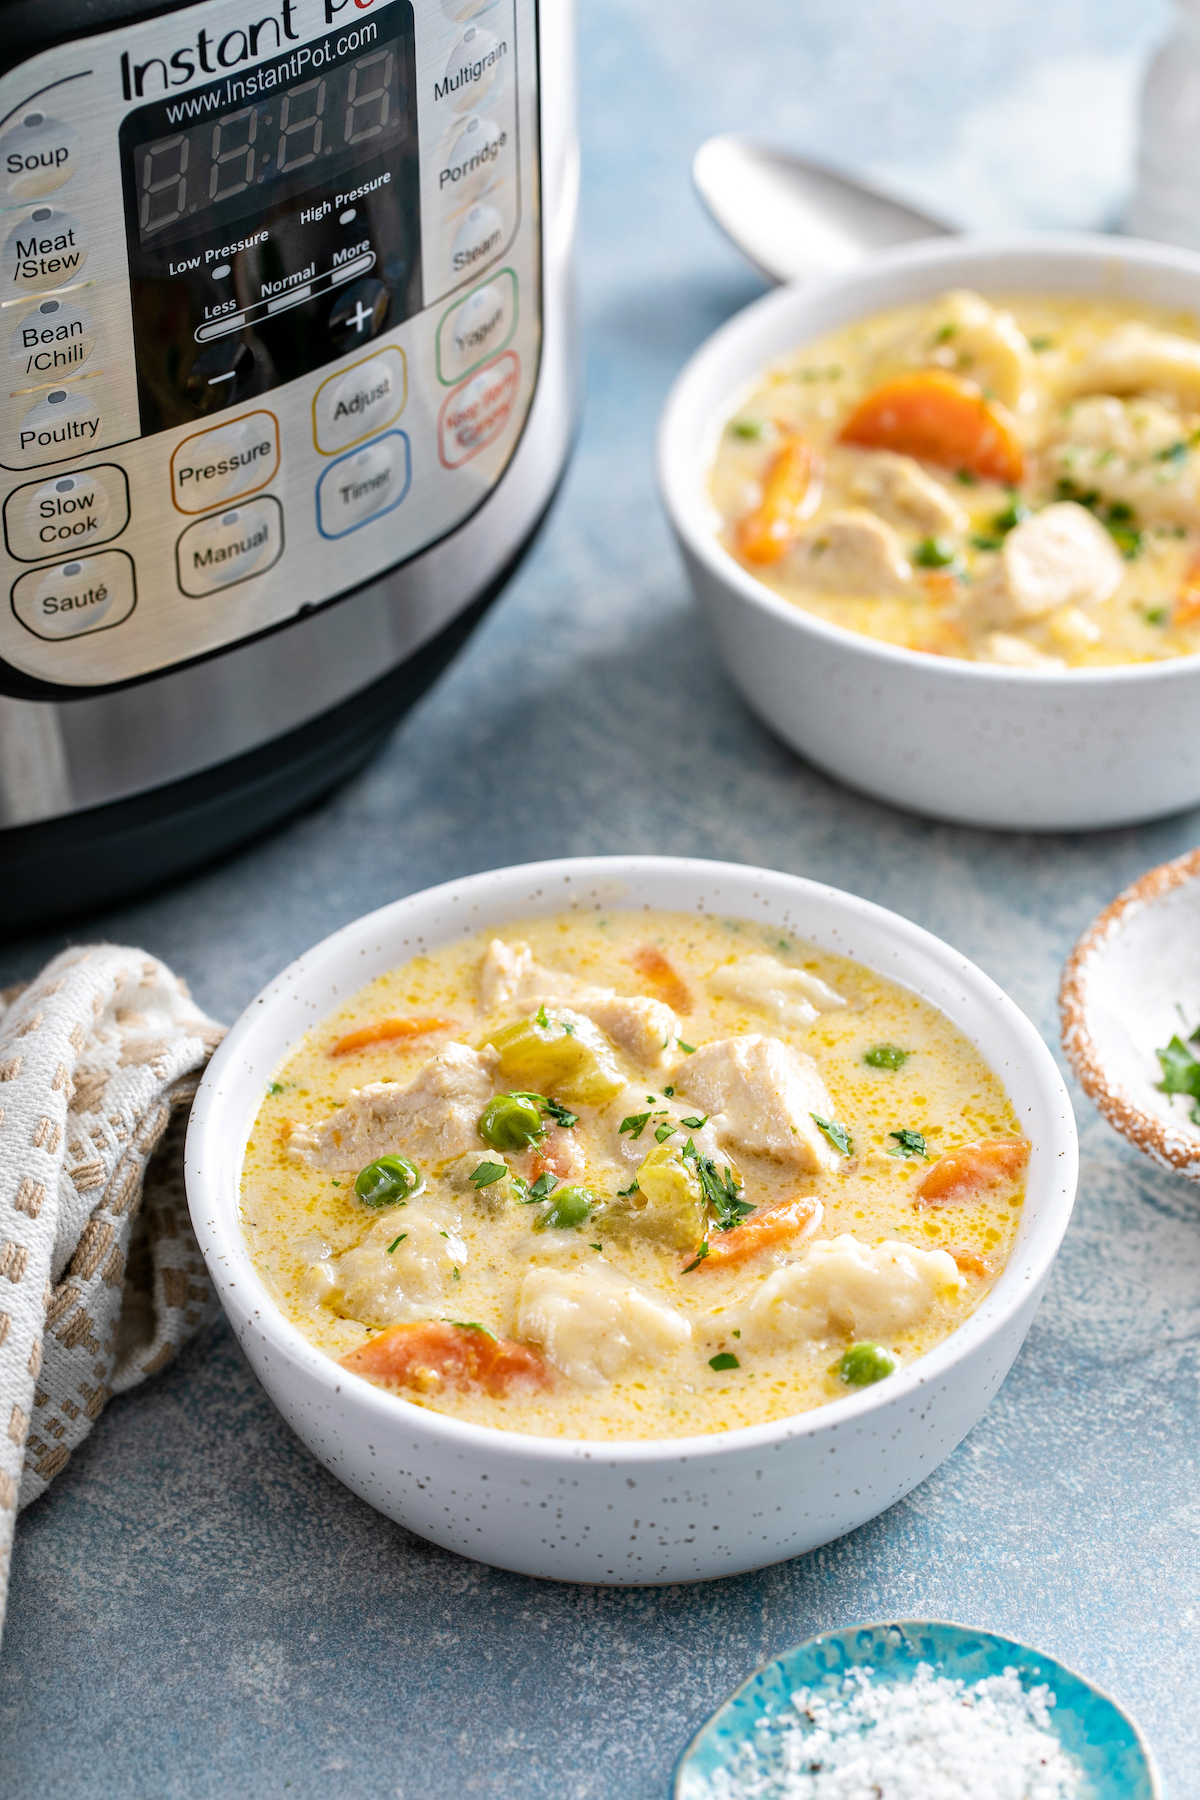 Instant pot chicken and dumplings in white bowls.